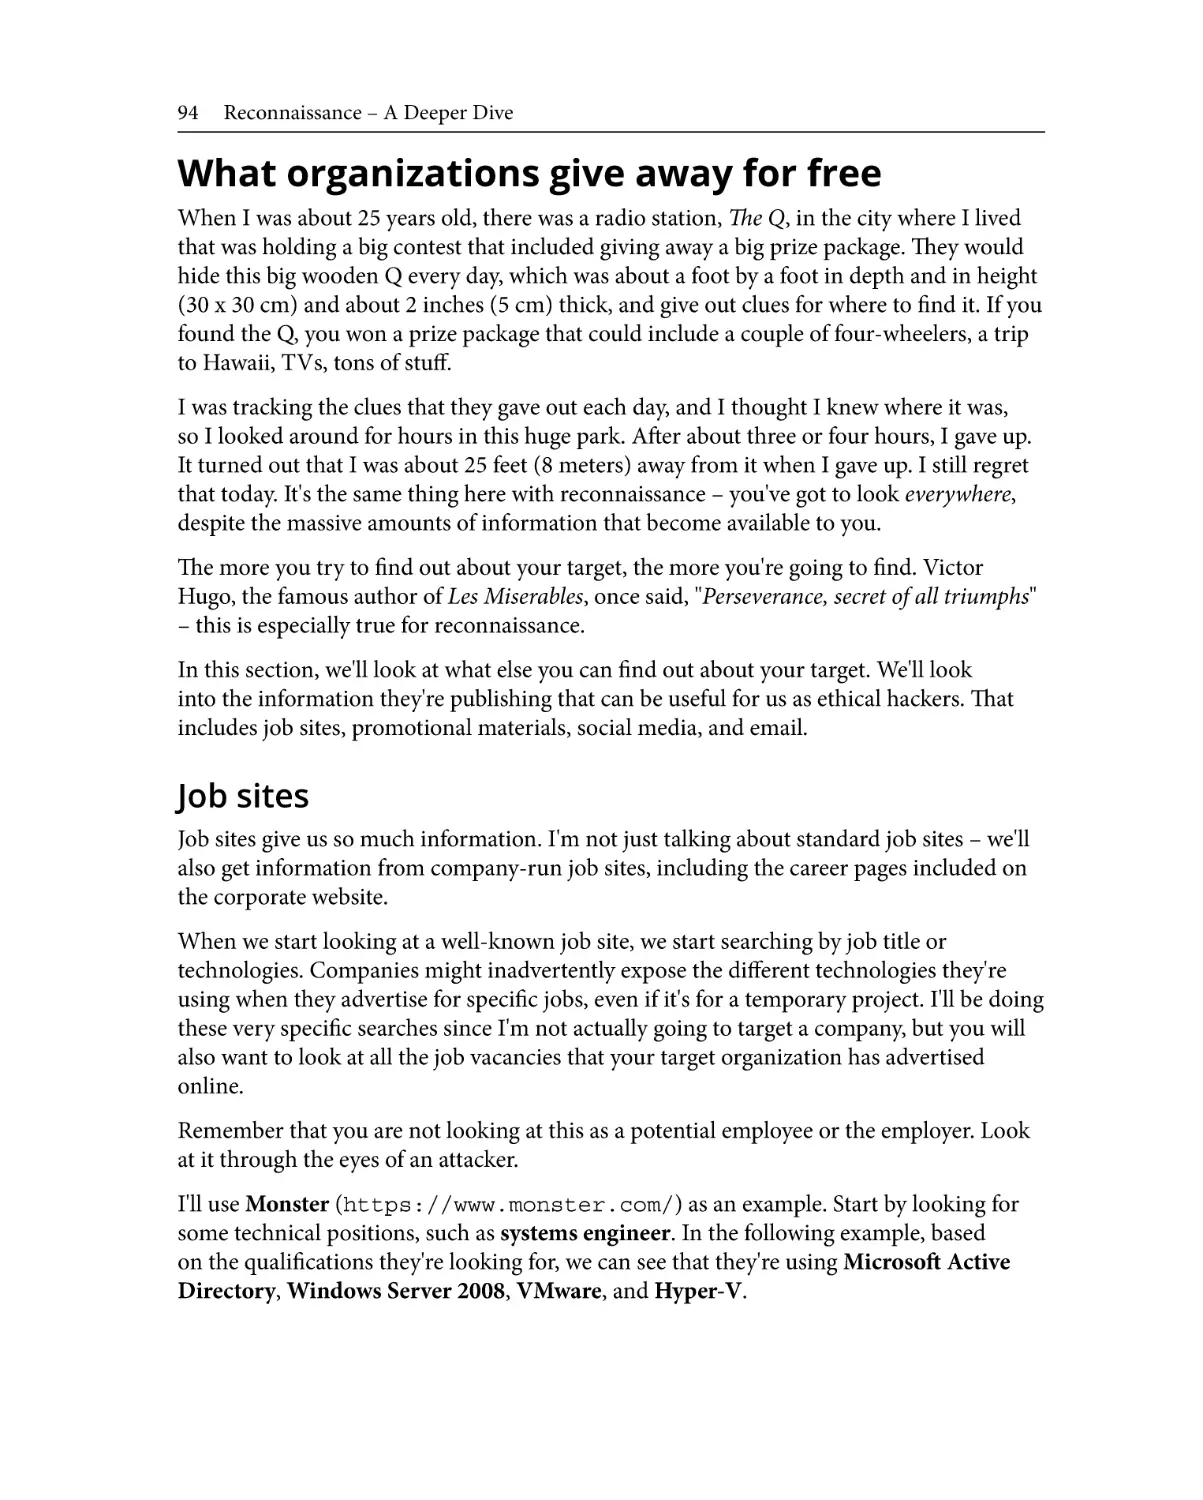 What organizations give away for free
Job sites